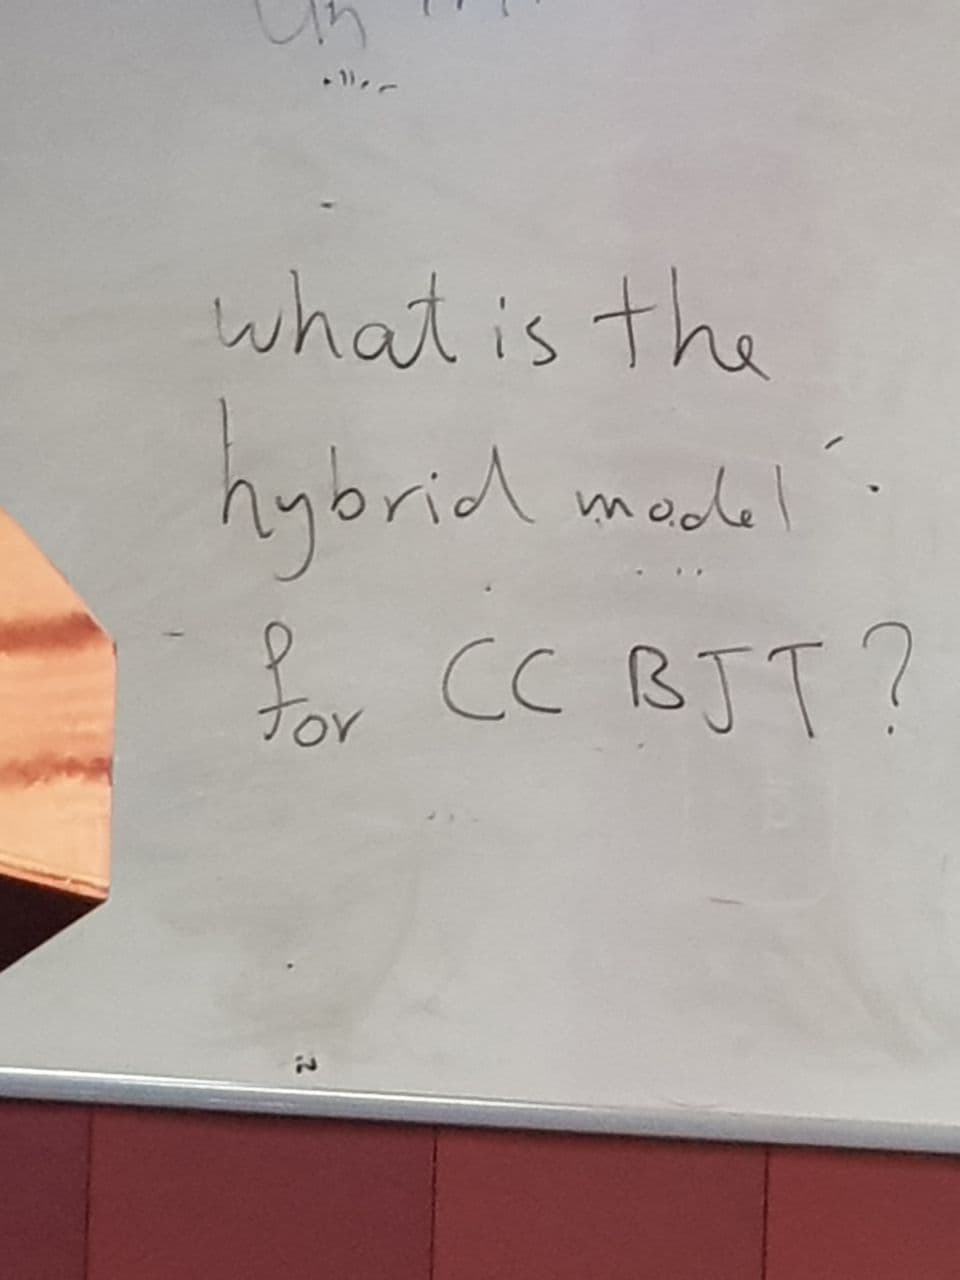 what is the
hybrid medel
for CC BJT?
